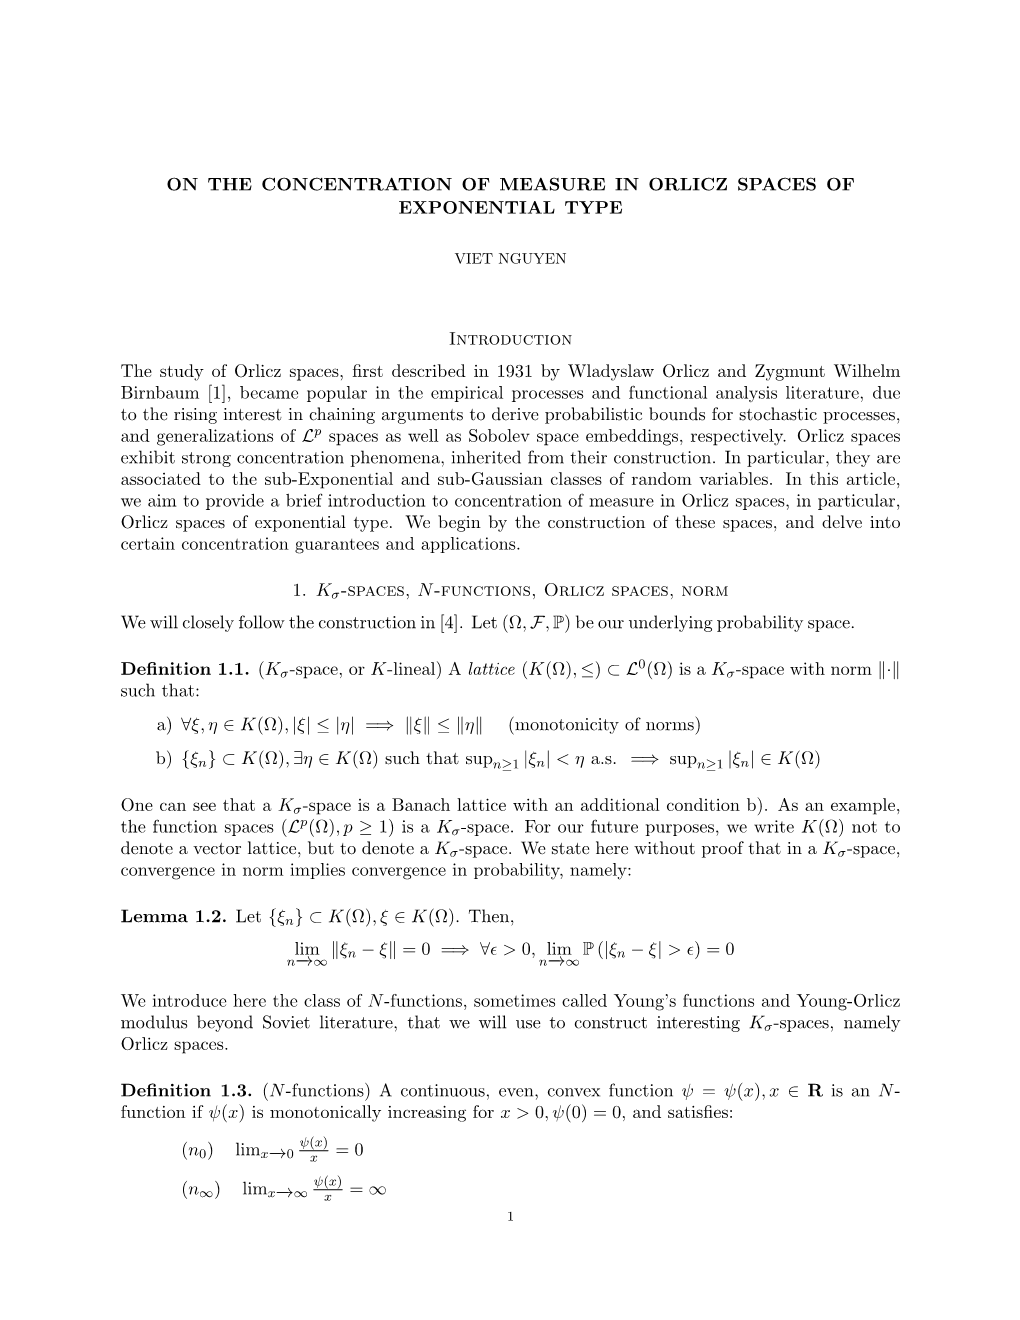 On the Concentration of Measure in Orlicz Spaces of Exponential Type